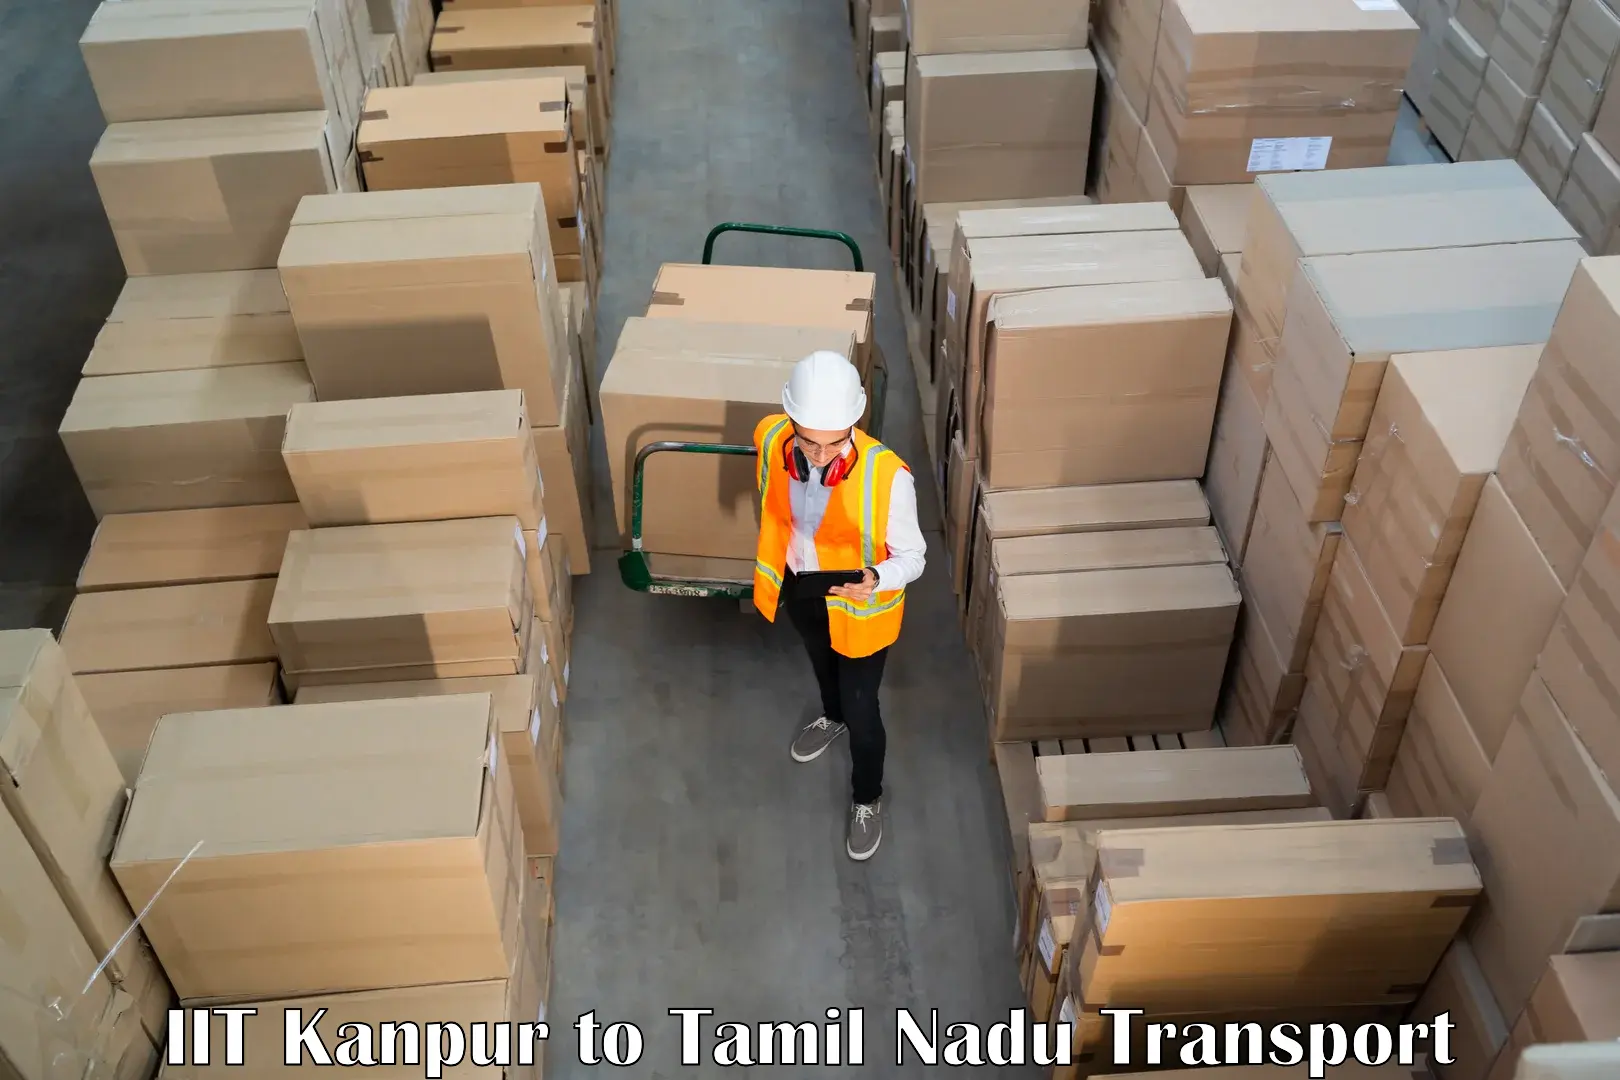 Domestic transport services IIT Kanpur to Chennai Port